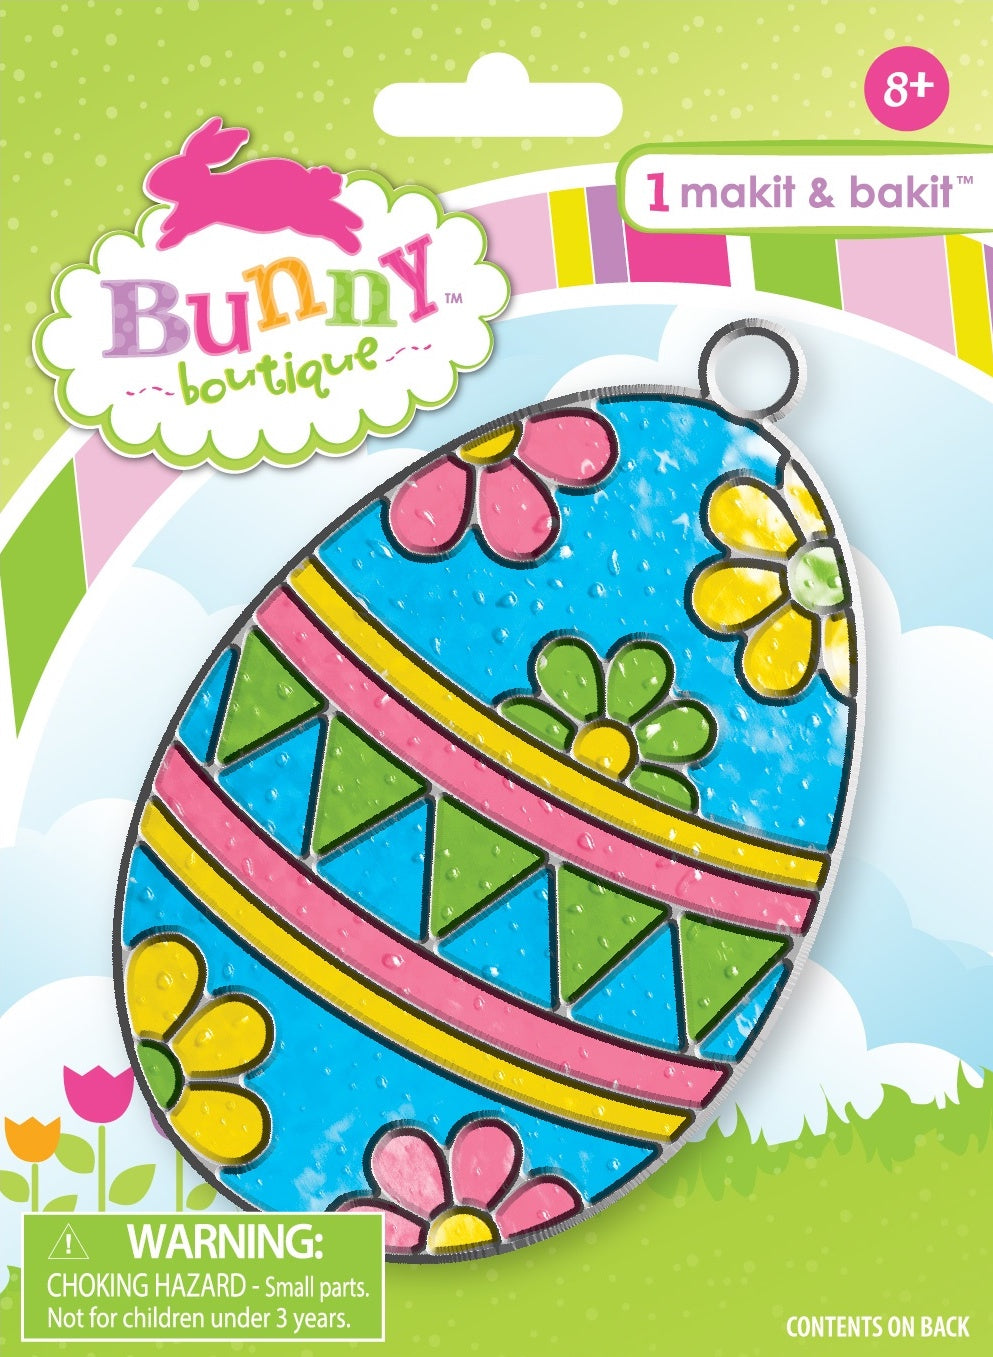 Makit and Bakit Kit. Design features a large colorfully designed easter egg.